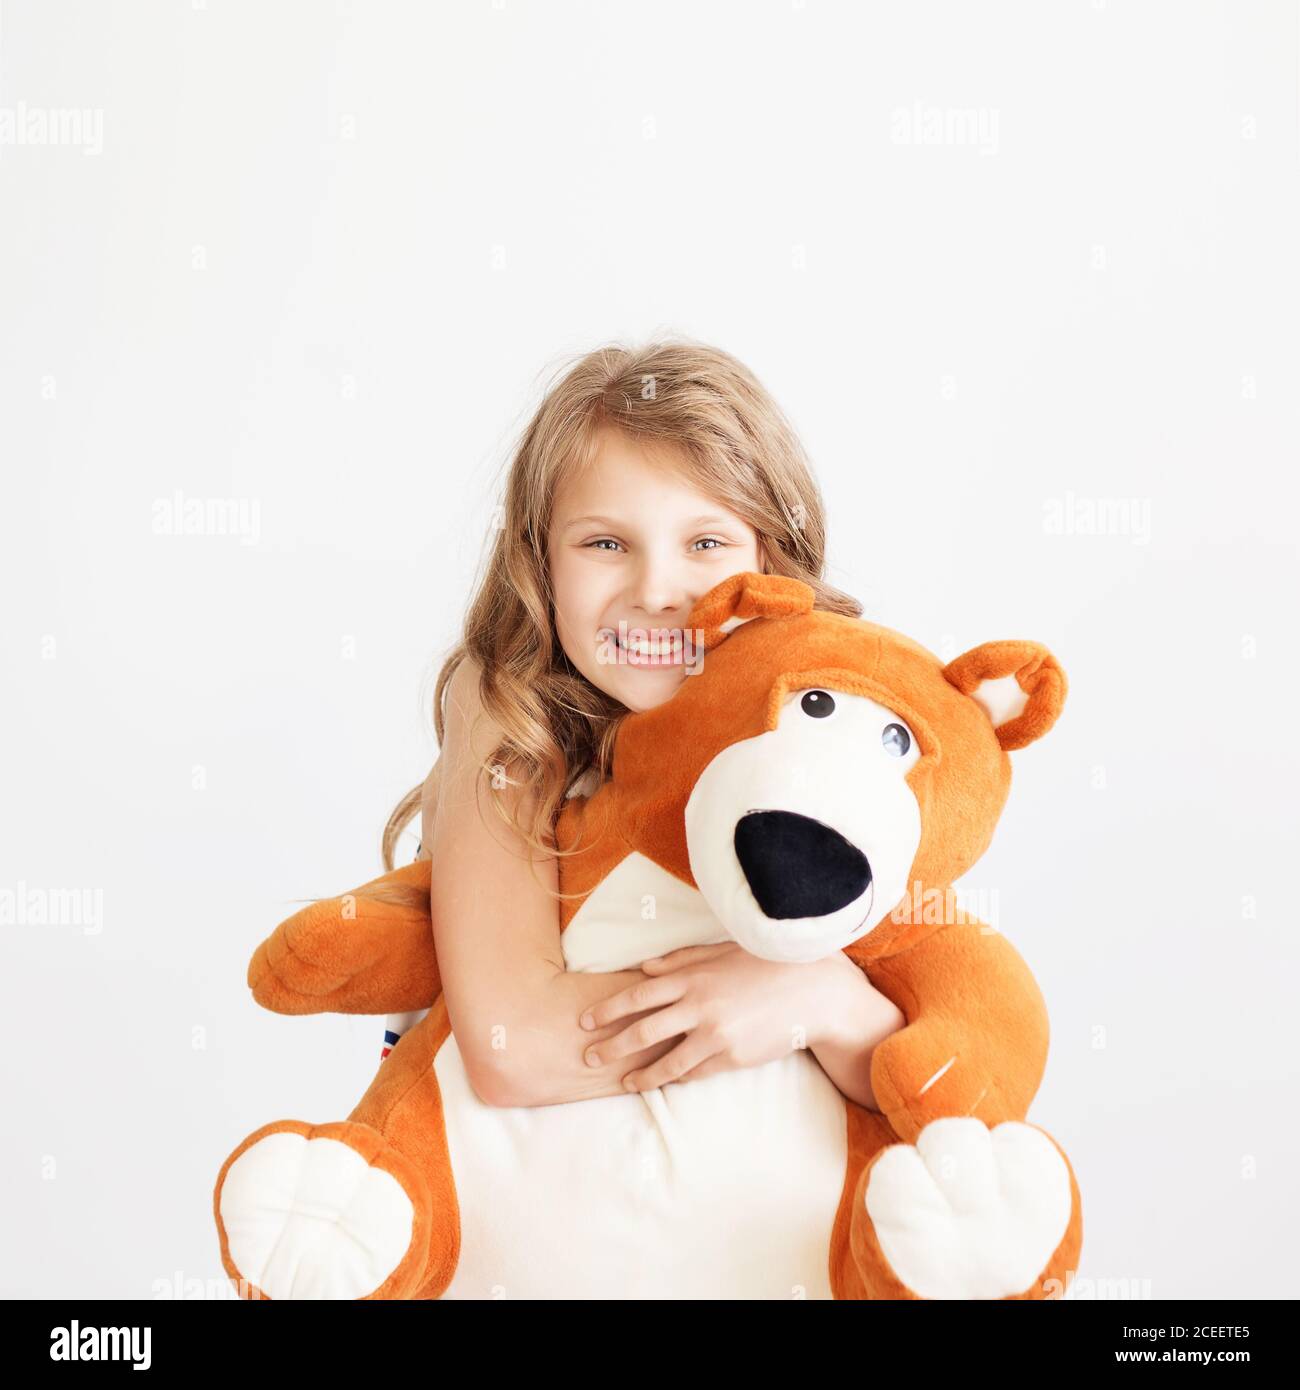 Little girl with big teddy bear having fun laughing Isolated on white ...